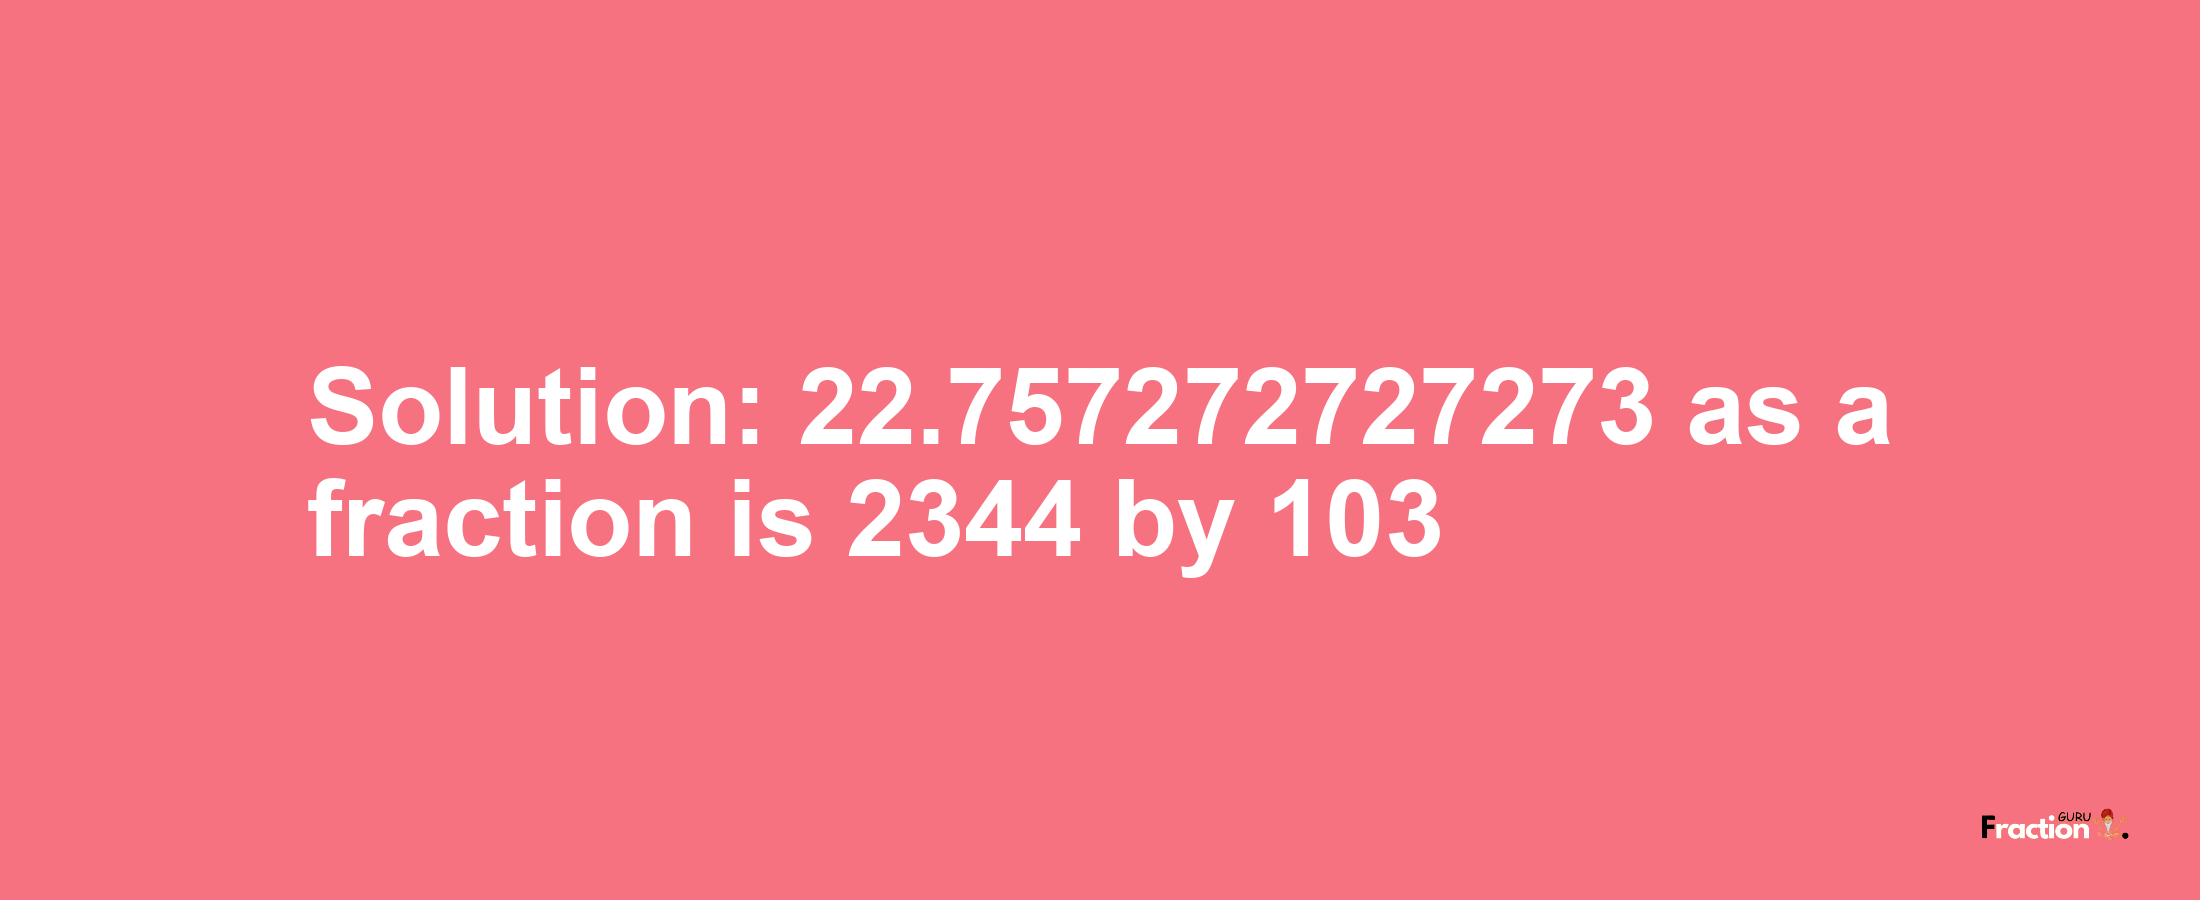 Solution:22.757272727273 as a fraction is 2344/103